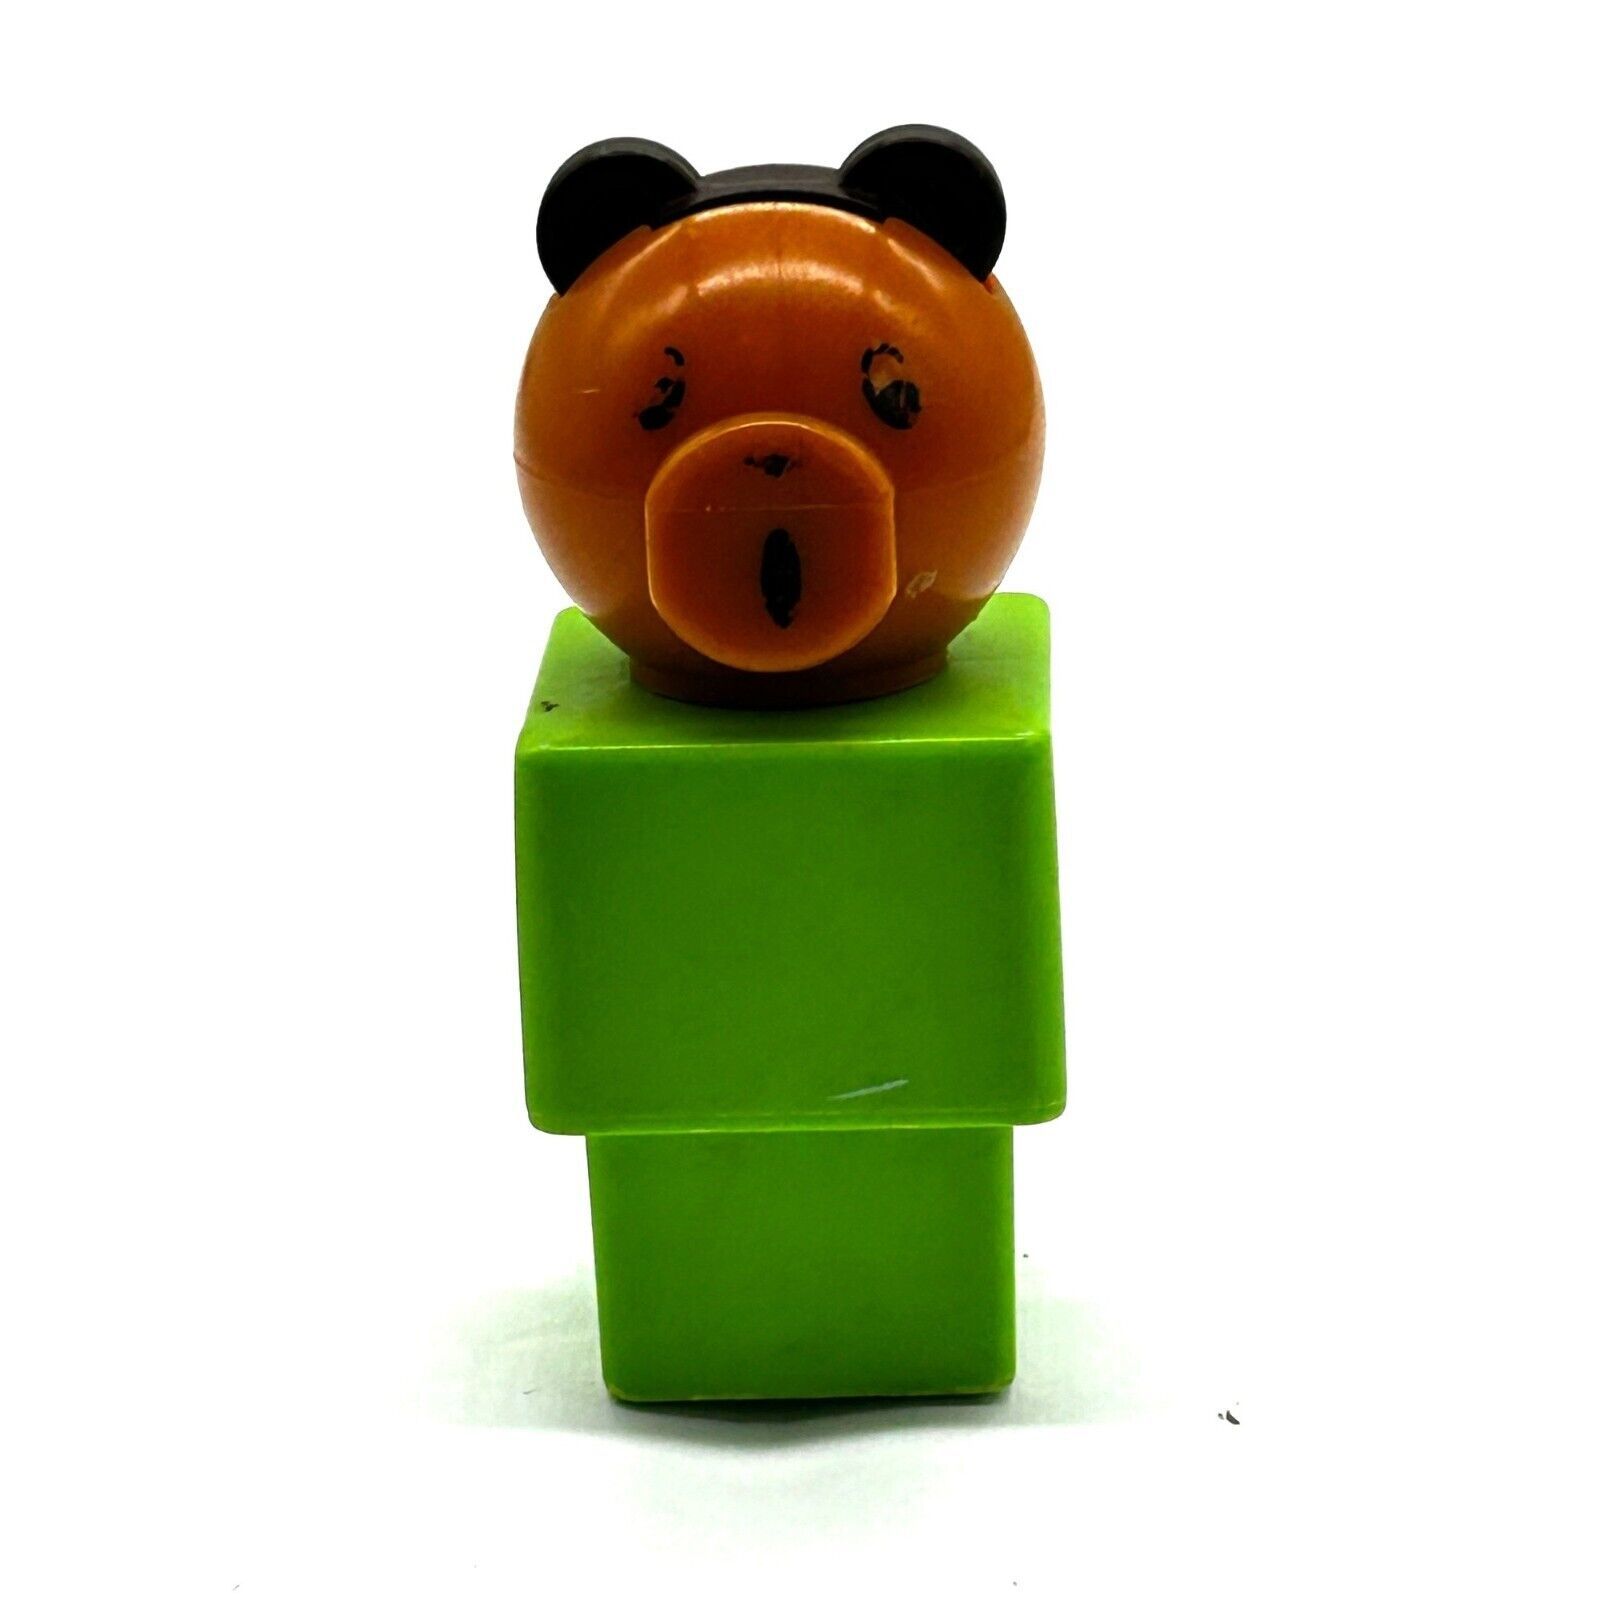 Fisher Price Jumbo Square Green Shape 3 1/2" Replacement Figure from Three Bears - $7.69